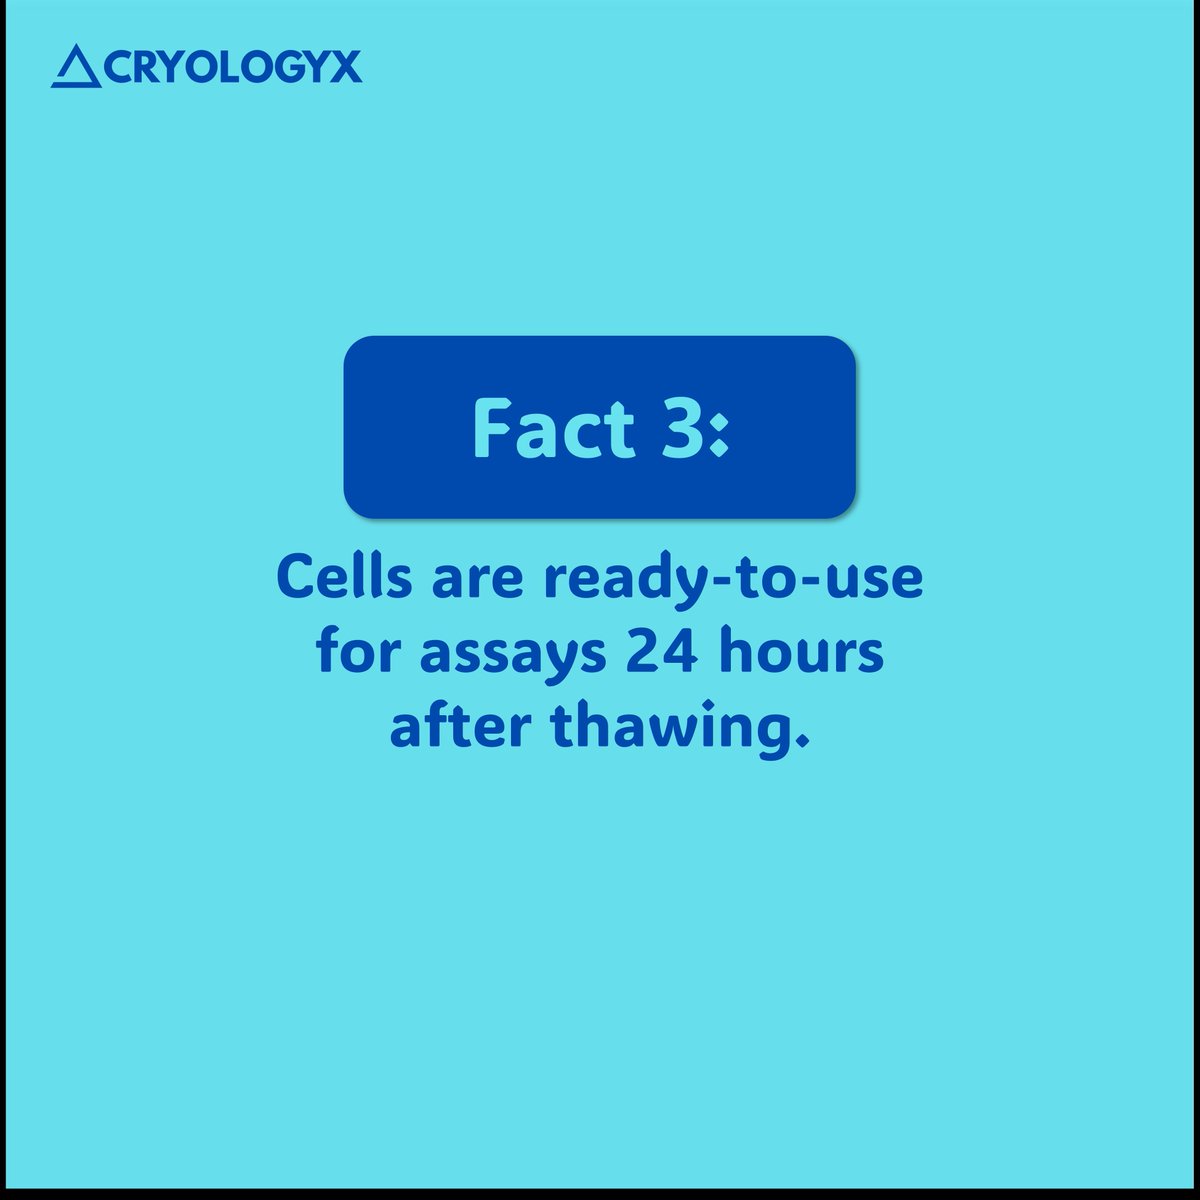 Exciting News! Introducing our cutting-edge #AssayReadyCells to revolutionize your research. Say goodbye to time-consuming #cellculture prep and unleash the potential of your experiments with us today! Find out more on: cryologyx.com #Innovation #biotech #LabLife